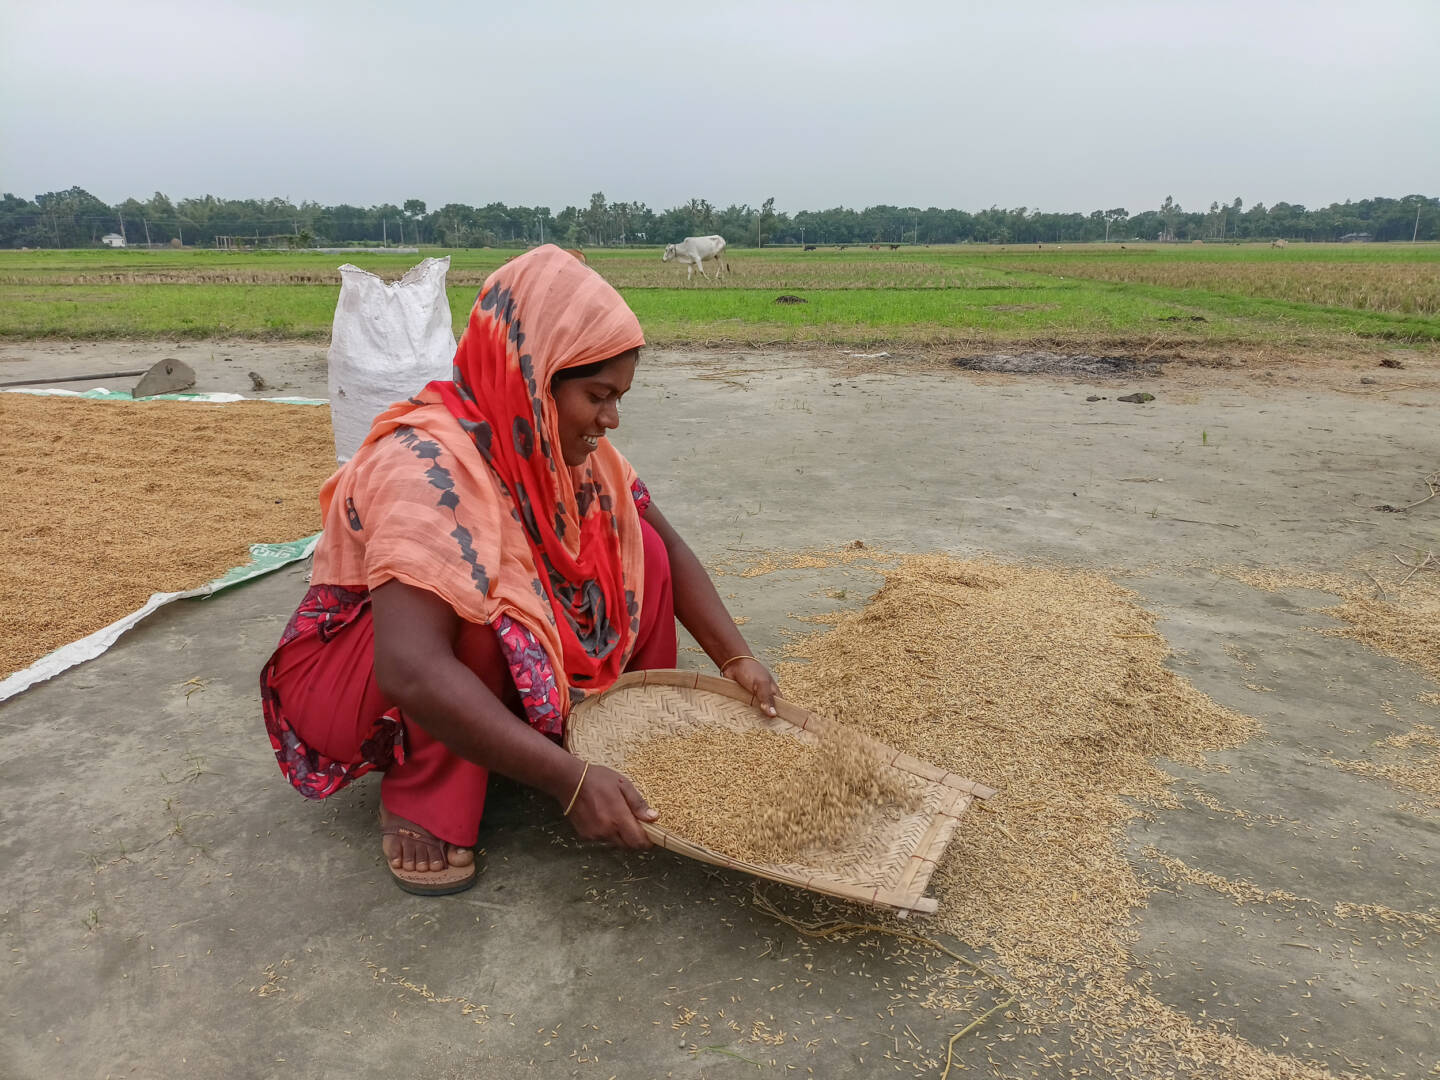 A woman squats down next to a pile of rice and holds a woven tray with rice on it. A green field is behind her.